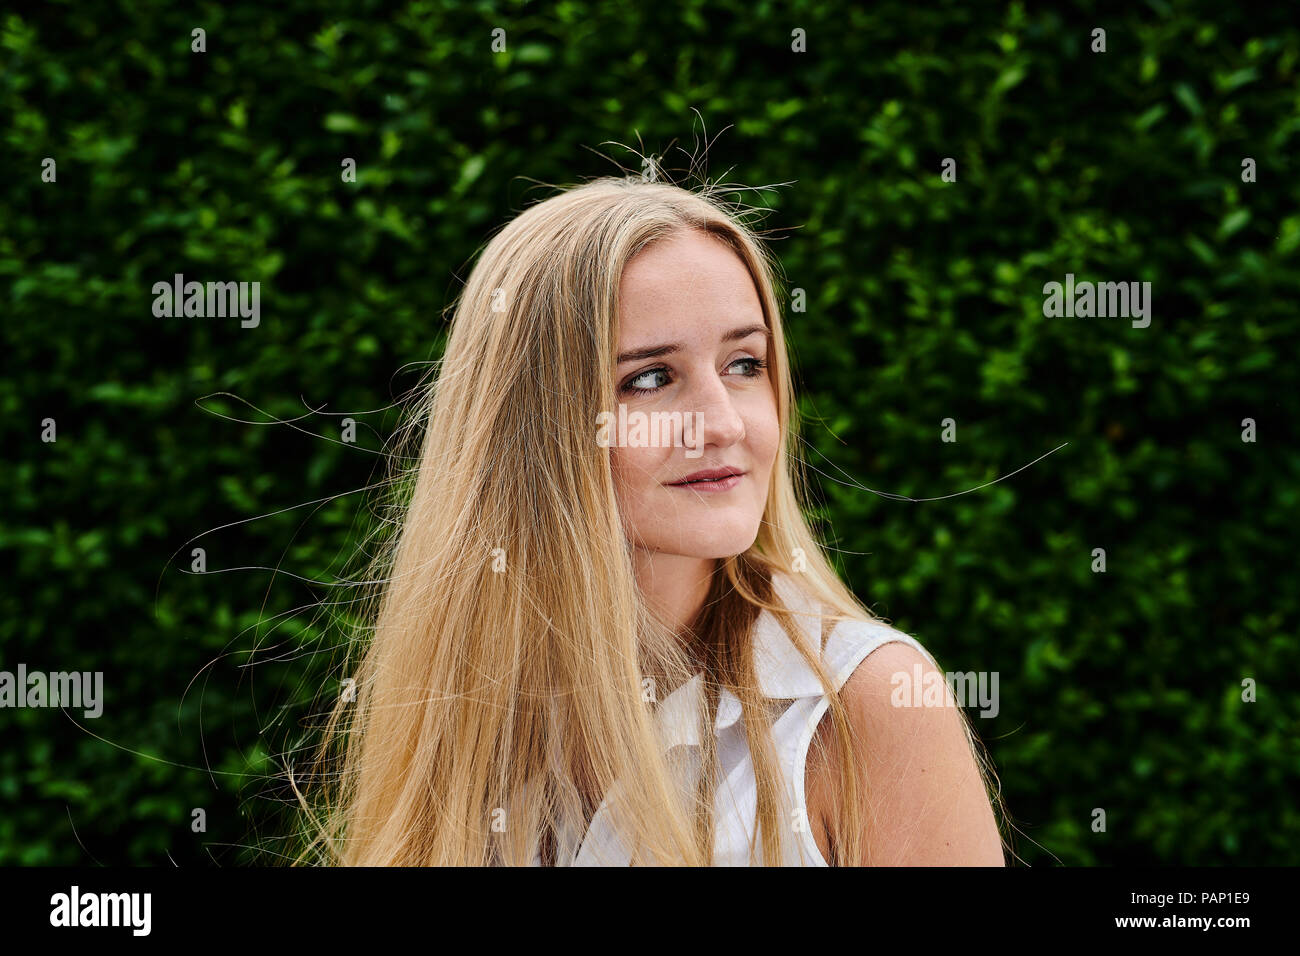 Blond young woman at a hedge looking sideways Stock Photo